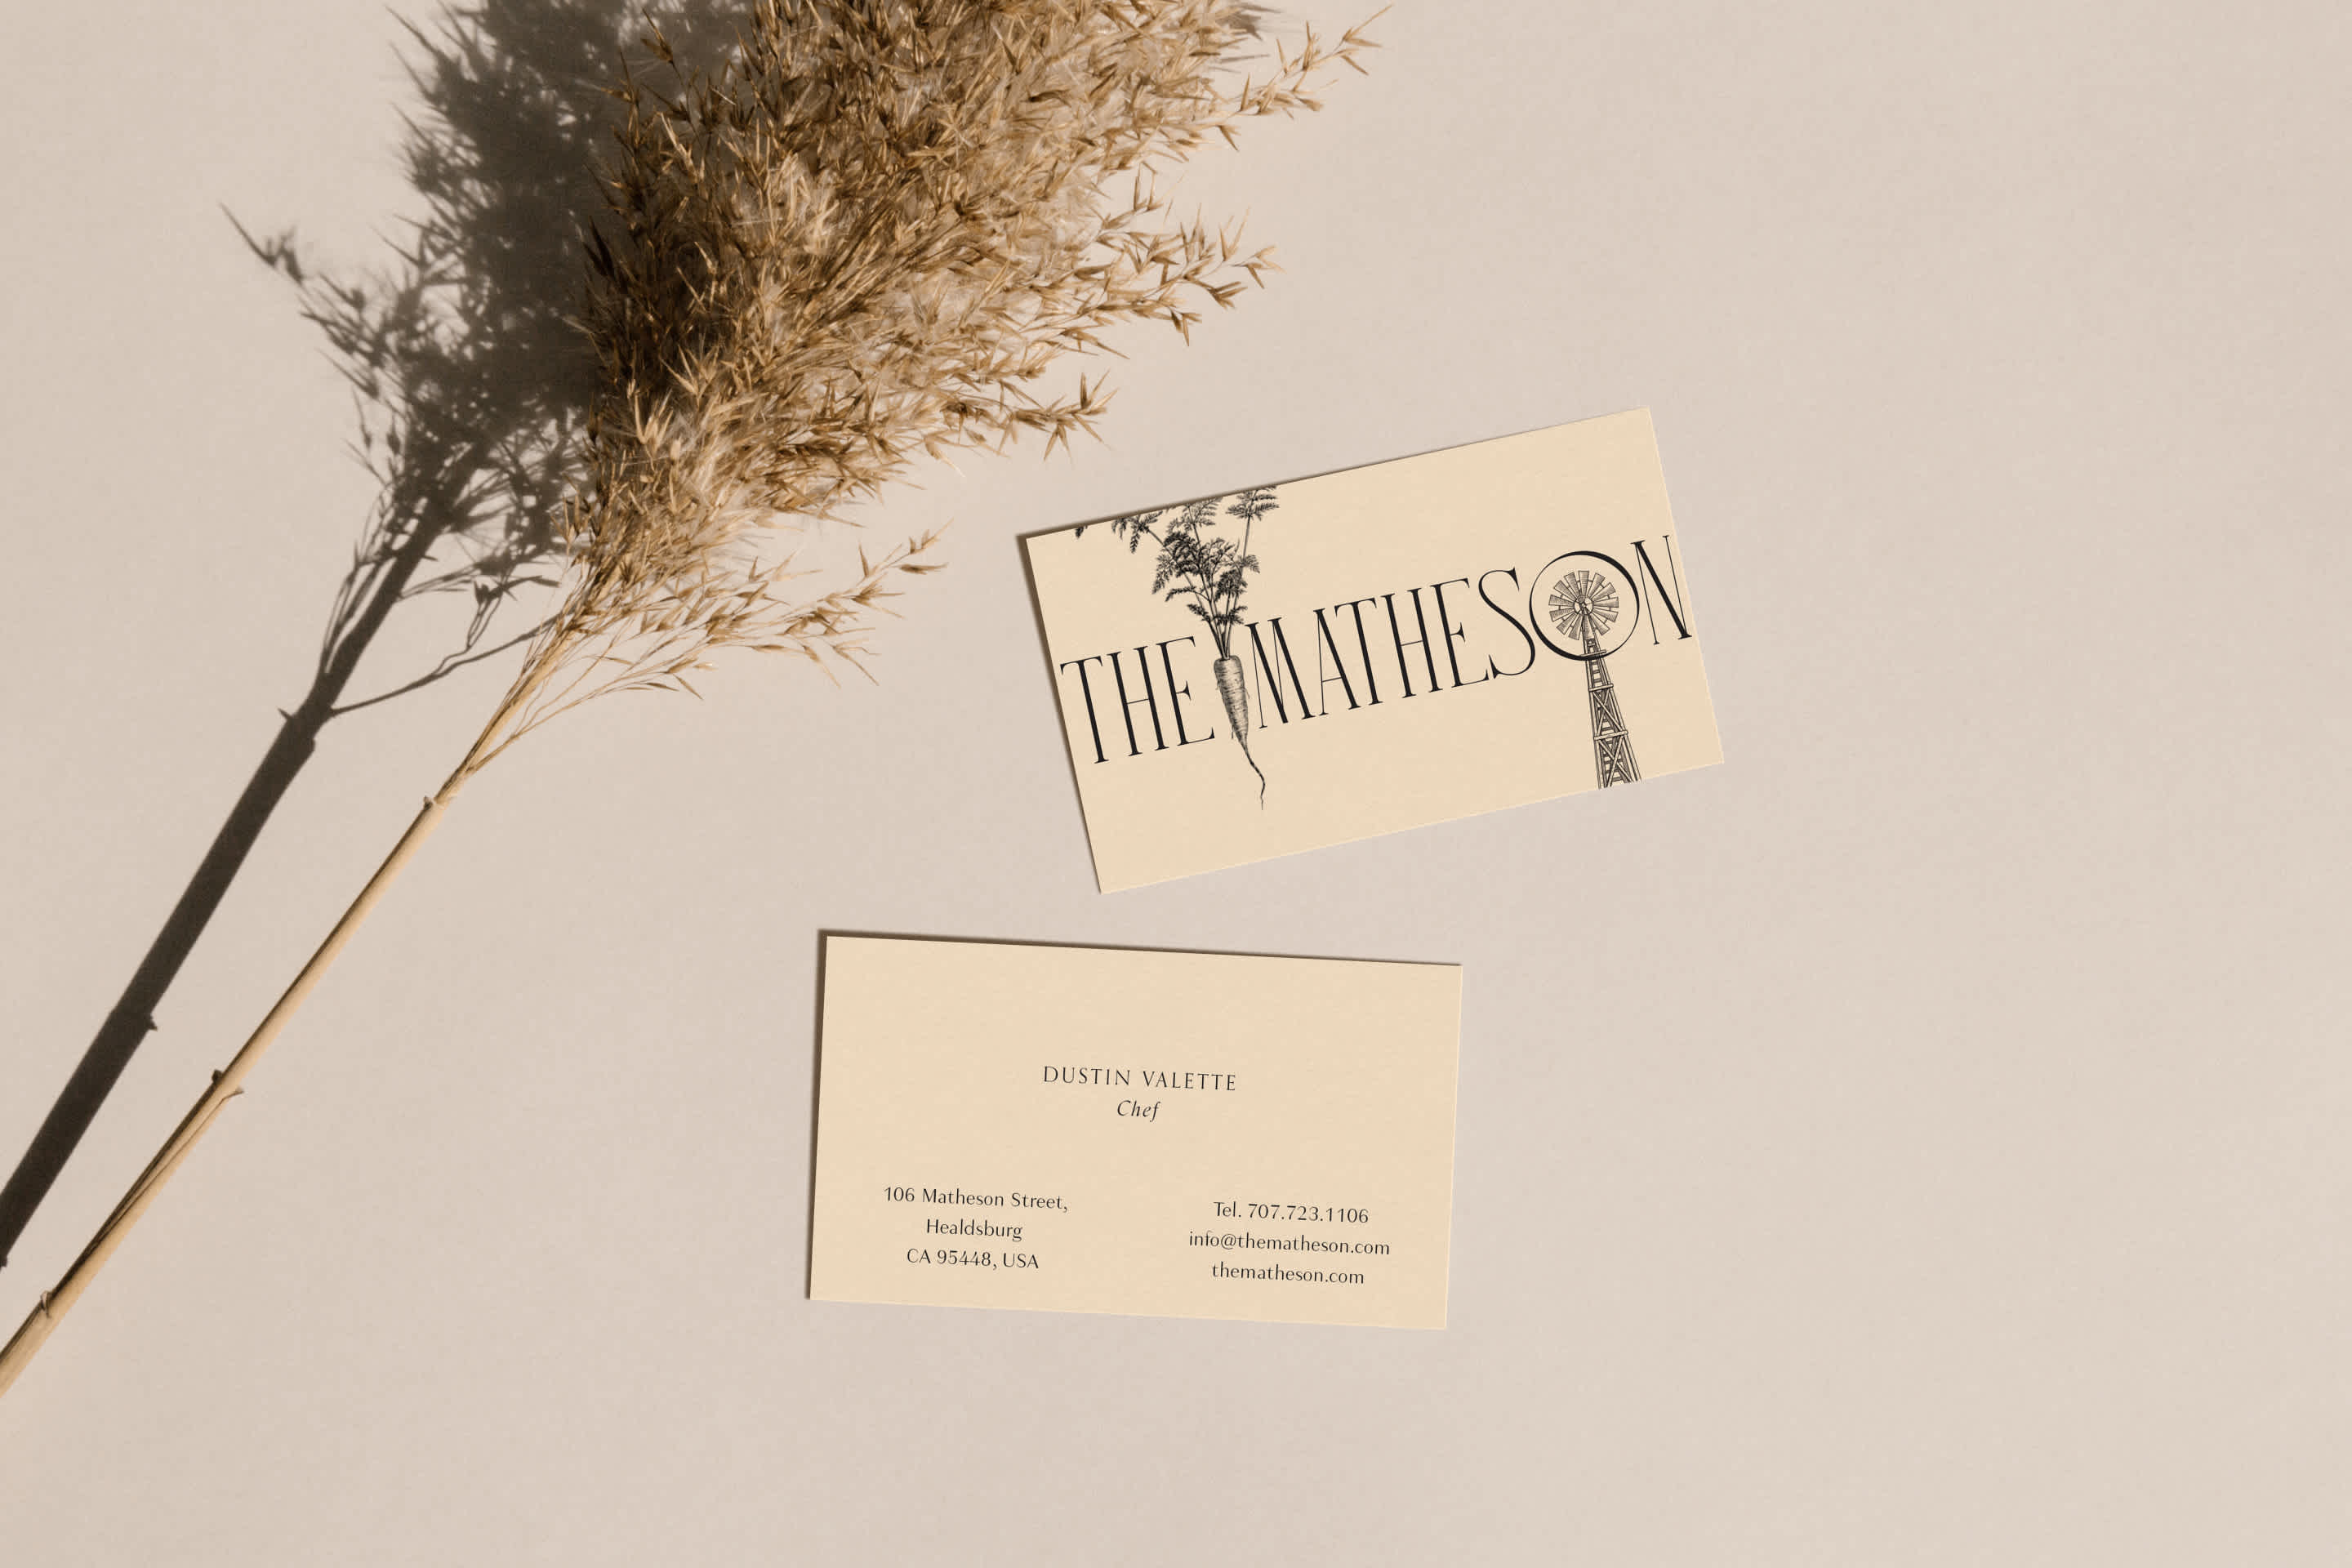 A couple business cards placed on the a table with some wheat on a stalk